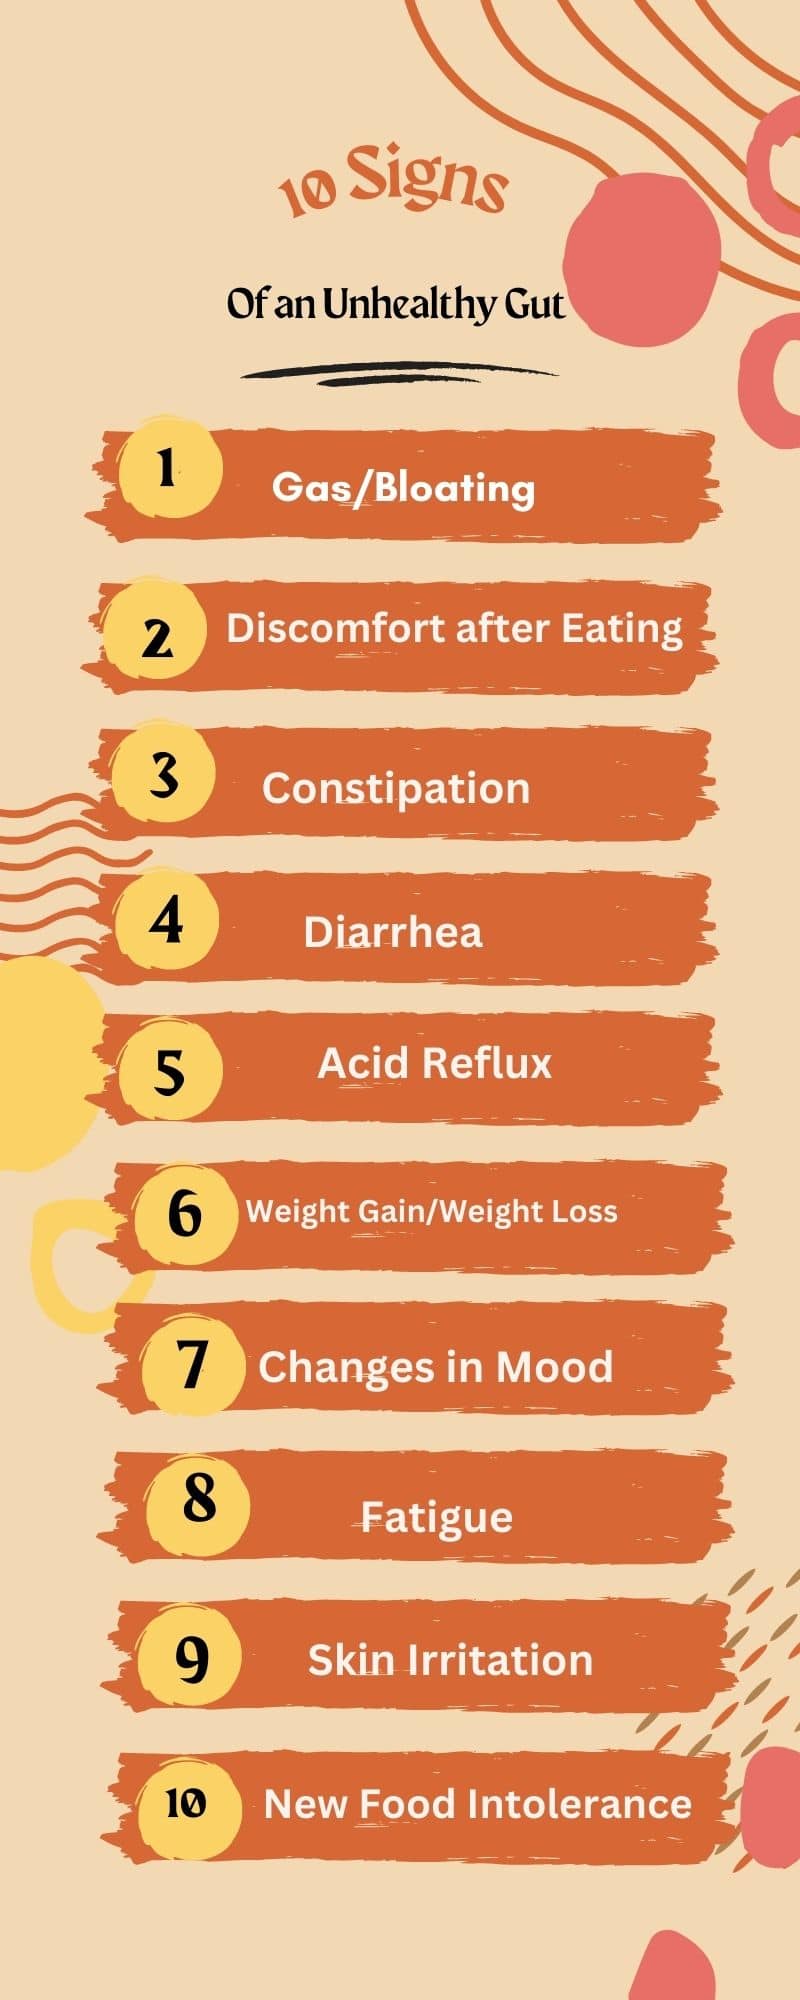 10 signs of an unhealthy gut infographic